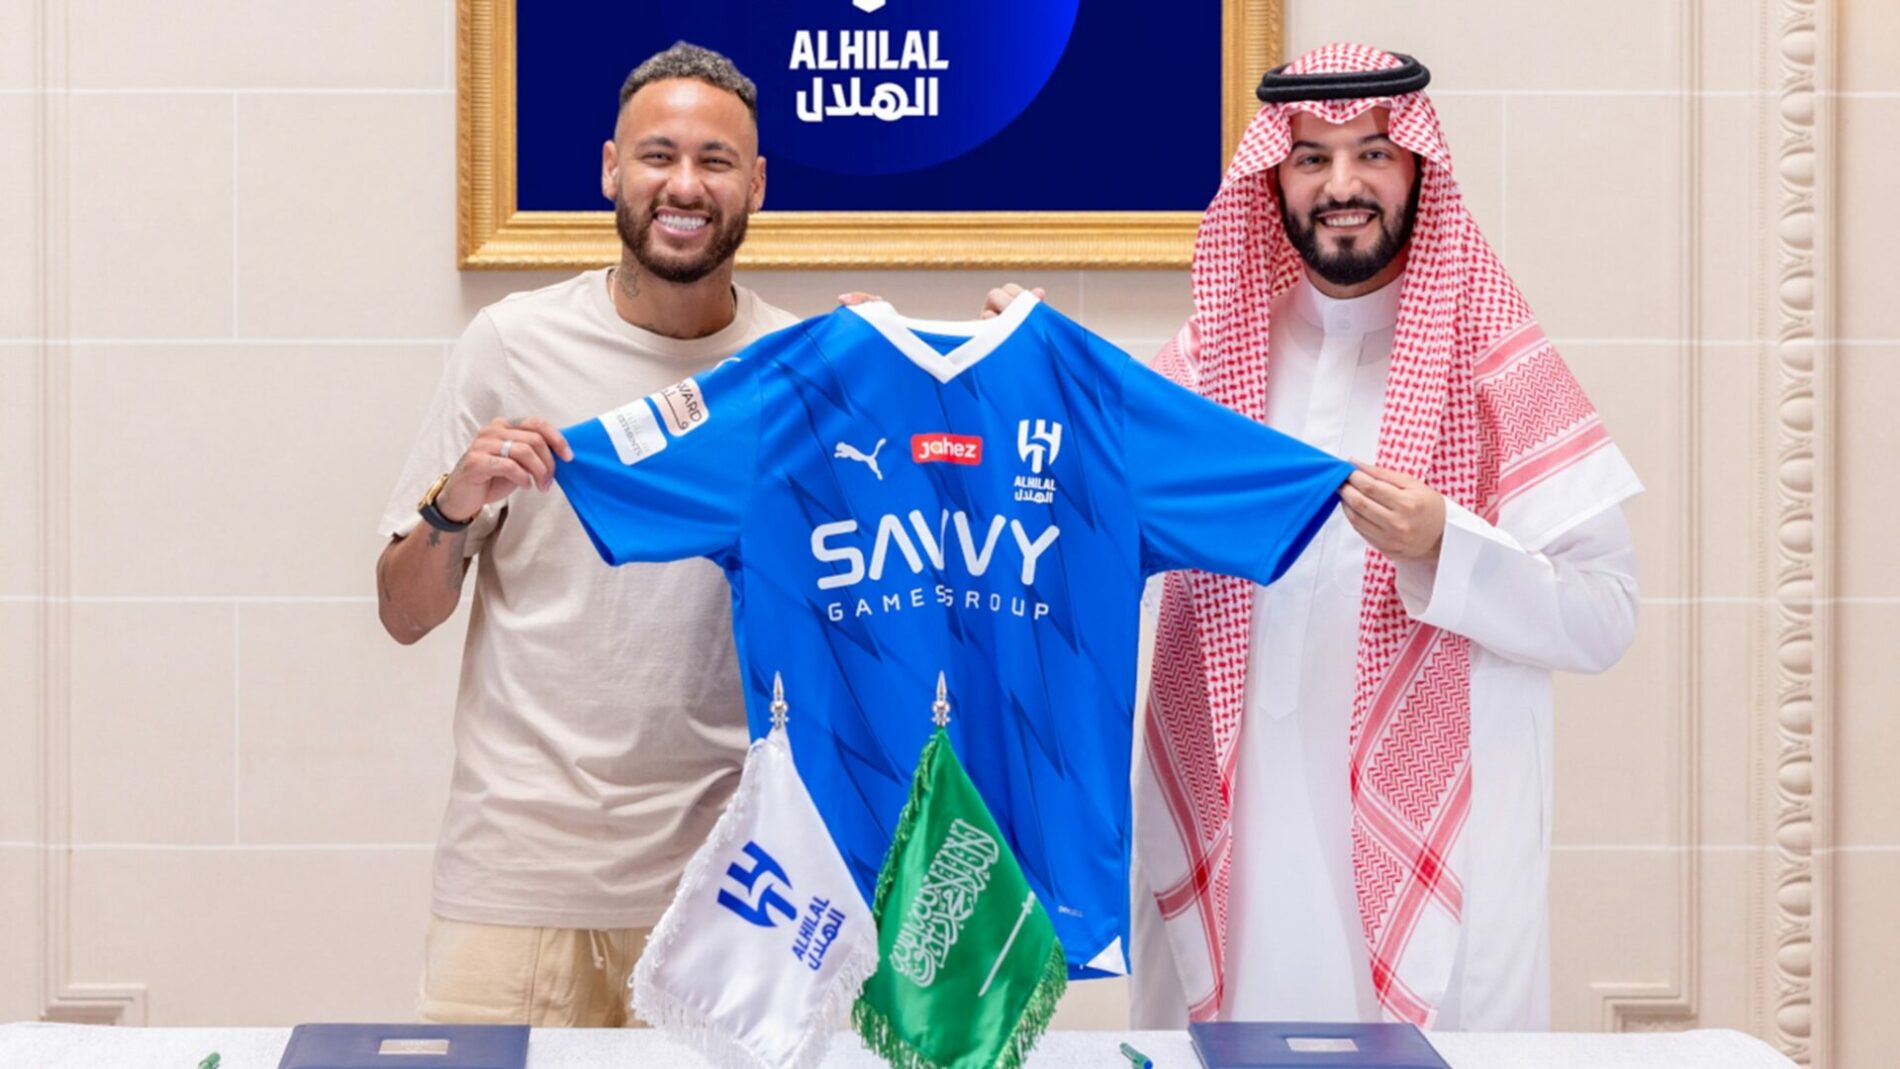 Led by the arrival of mega-stars, Saudi clubs have gained nearly 20 million new Instagram followers in 2023